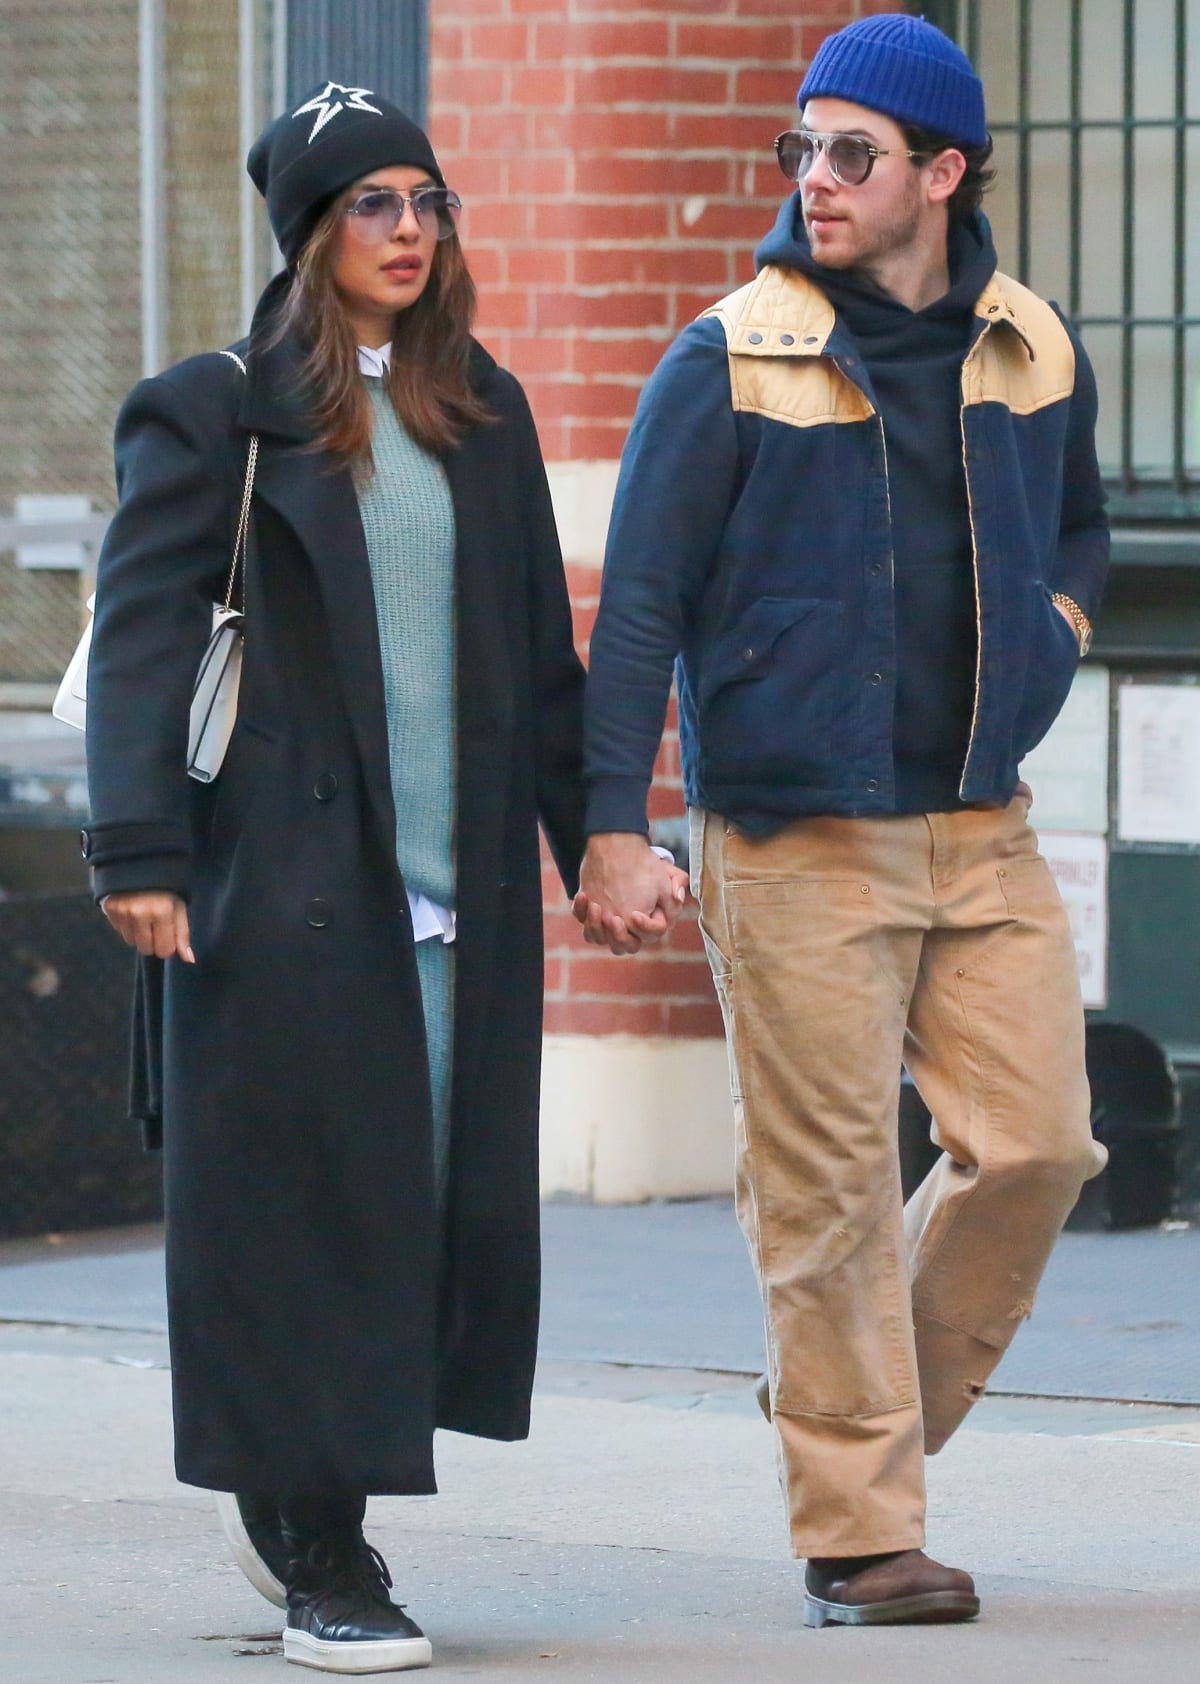 Priyanka Chopra wearing a turquoise knit dress under a long black coat with a dark blue beanie, tinted sunglasses, a white handbag, and black shoes with white soles